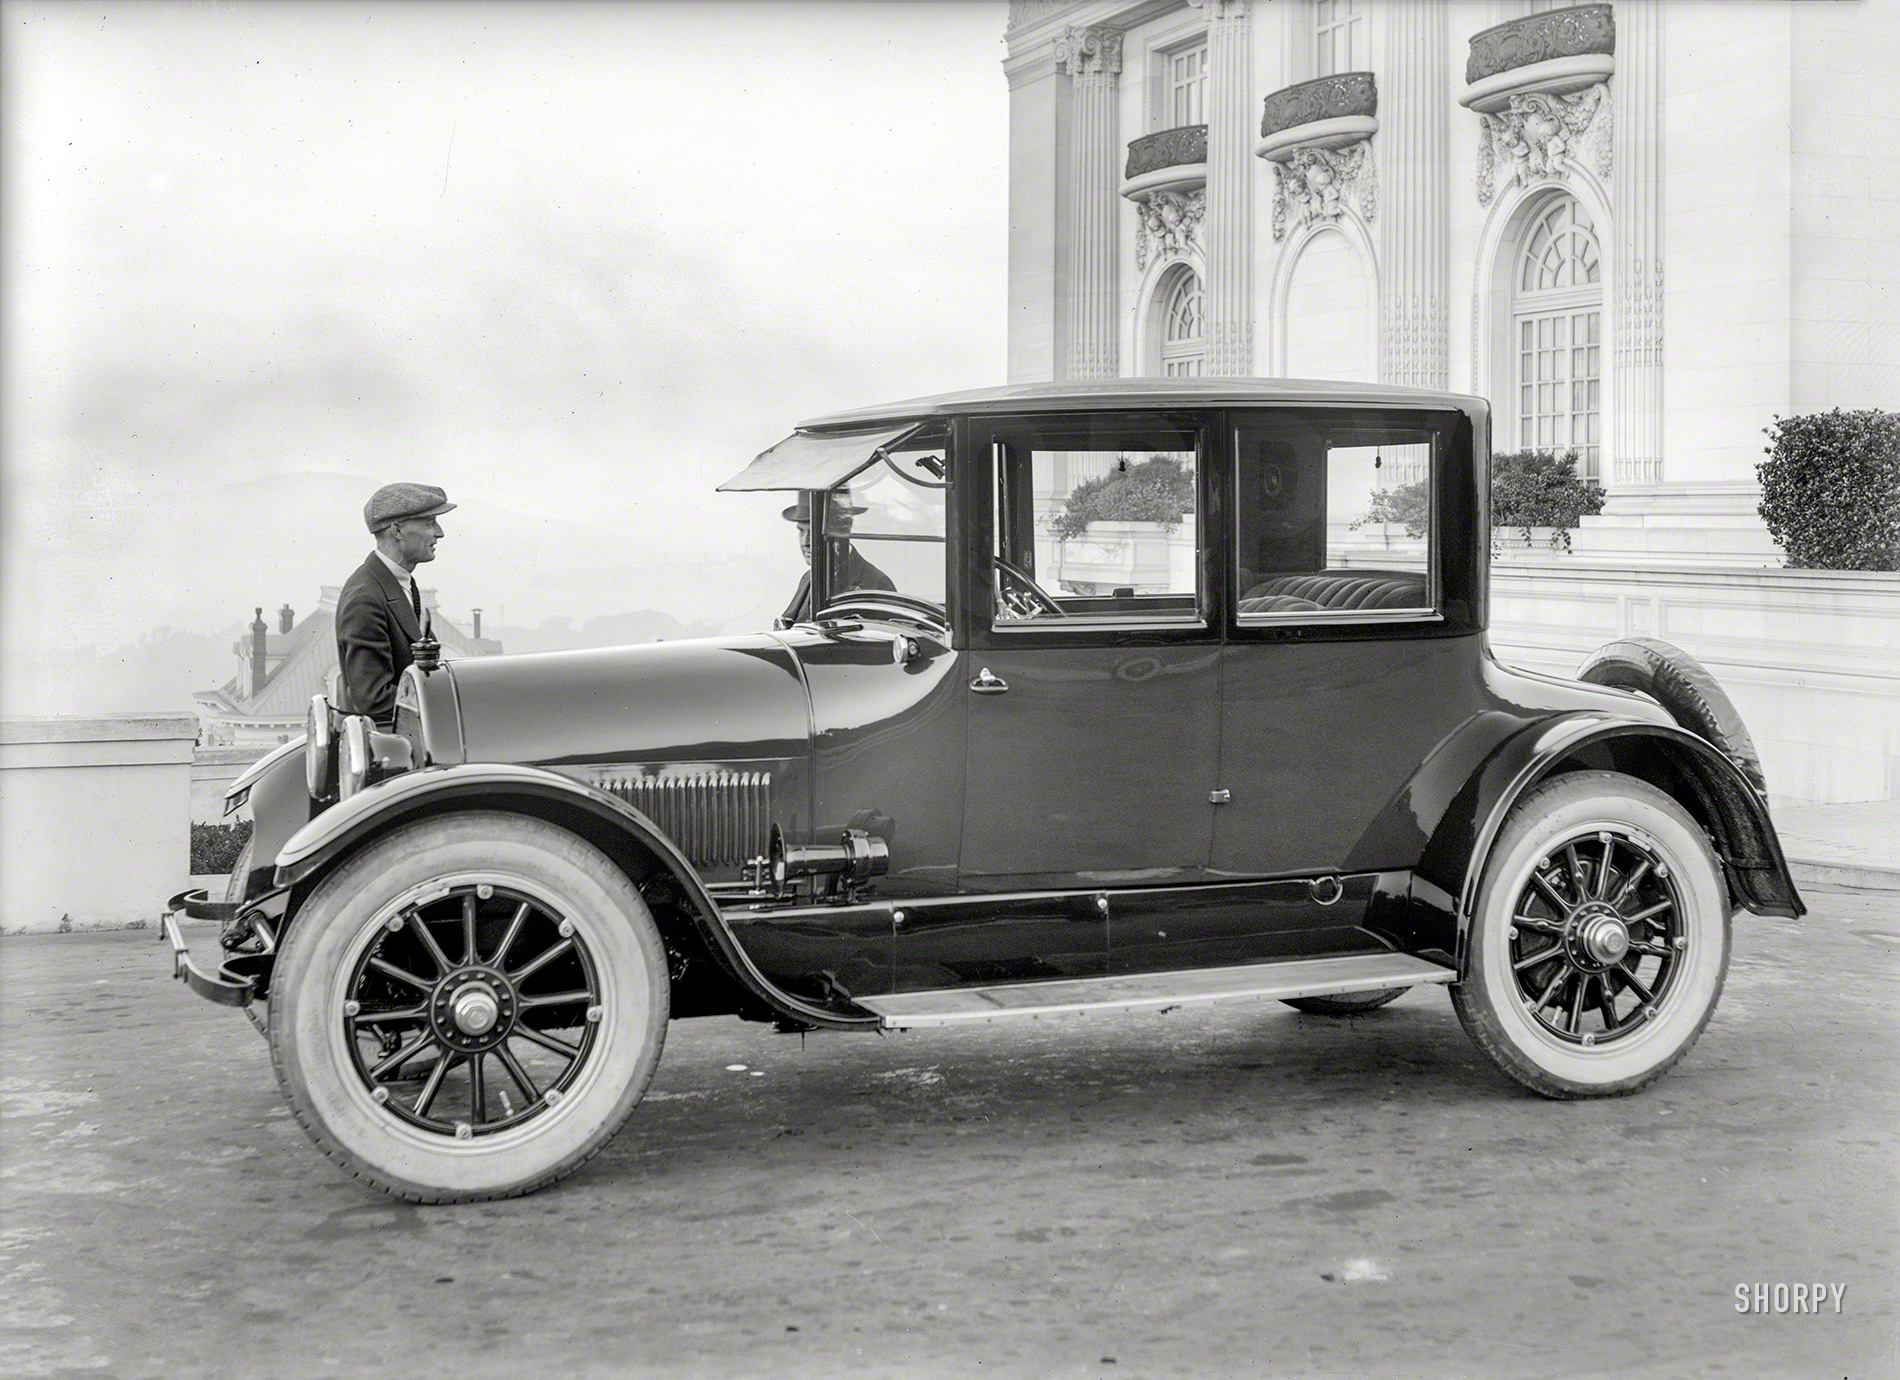 San Francisco. "Cadillac coupe." A rare extant marque in the Shorpy Concours of Quaint Conveyances. Glass negative by Christopher Helin. View full size.